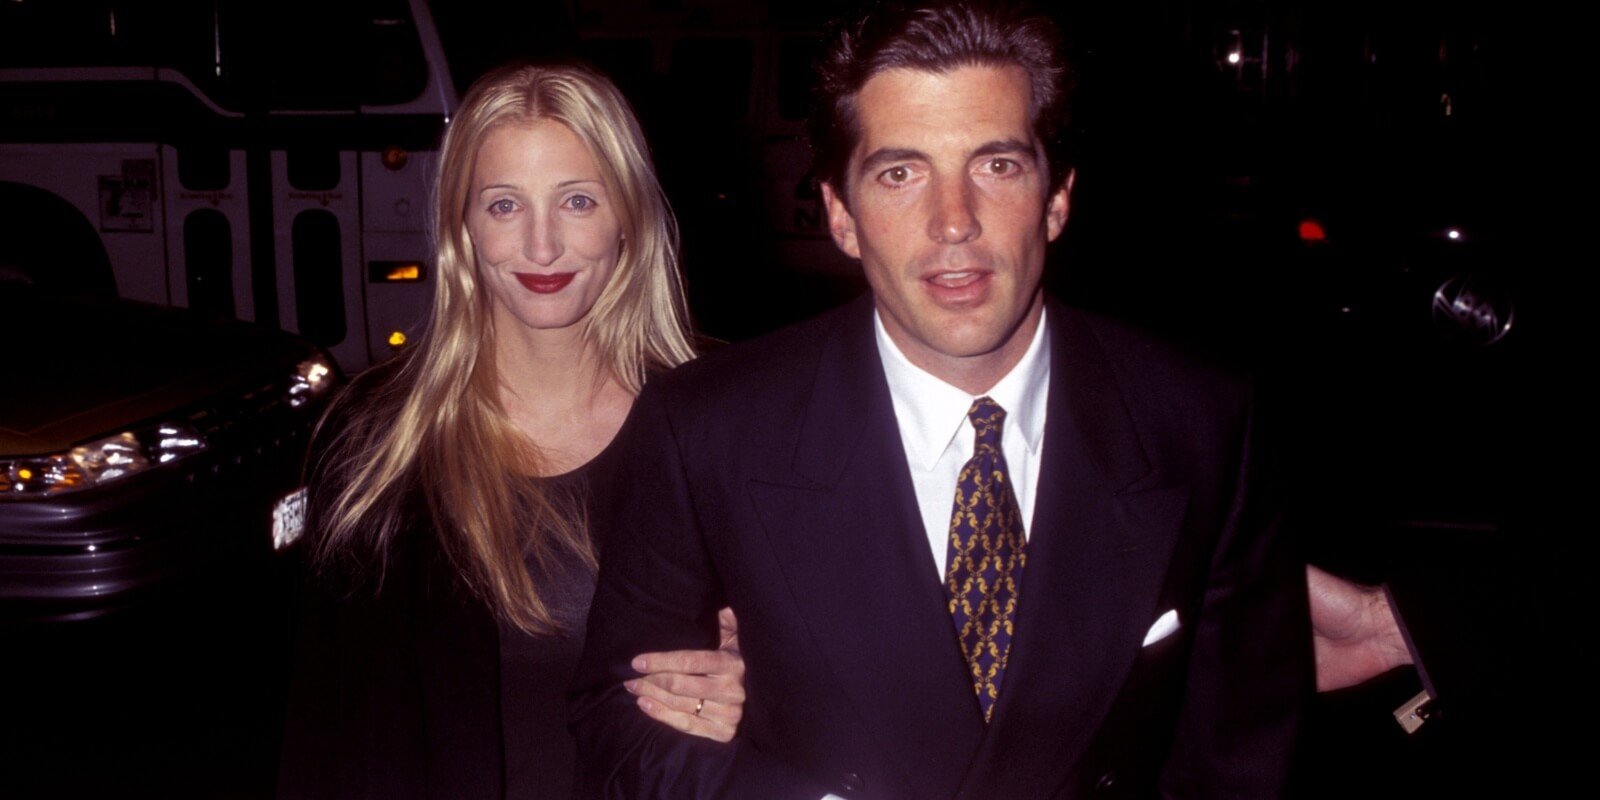 Carolyn Bessette Kennedy and John F. Kennedy Jr. at the 2nd anniversary party for 'George' Magazine.